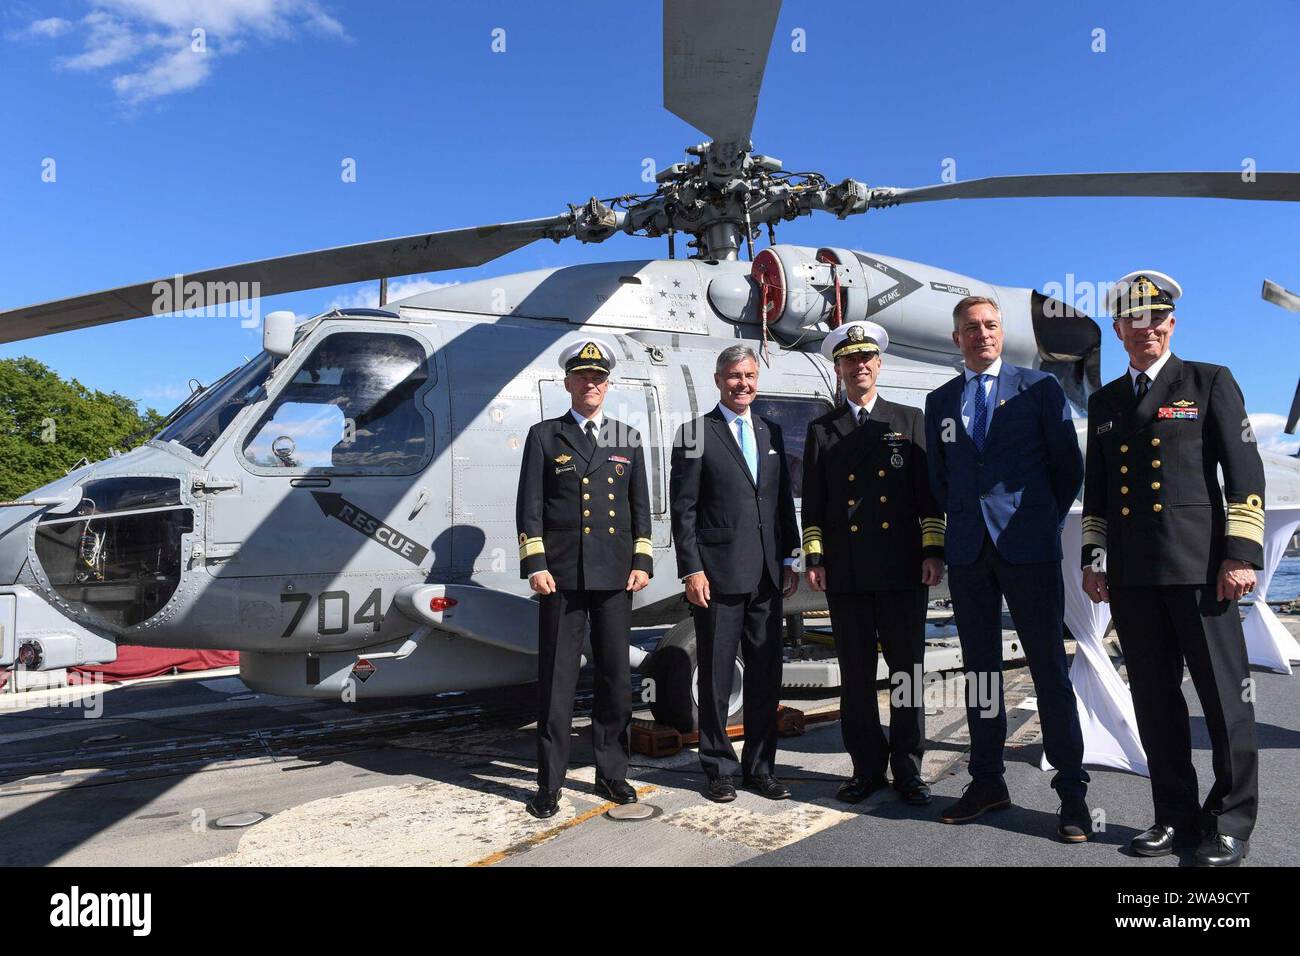 US military forces. 180625FP878-208 OSLO, Norway (June 25, 2018) From left to right, Chief of the Norwegian Royal Navy Rear Adm. Nils Stensones, U.S. Ambassador to Norway Kenneth J. Braithwaite, Chief of Naval Operations Adm. John Richardson, Norwegian Minister of Defense Frank Bakke-Jensen, and the Norwegian Chief of Defense Adm. Haakon Bruun-Hanssen, pose for a photo aboard the Arleigh Burke-class guided-missile destroyer USS Bainbridge (DDG 96) in Oslo, Norway, June 25, 2018. Bainbridge, homeported at Naval Station Norfolk, is conducting naval operations in the U.S. 6th Fleet area of operat Stock Photo